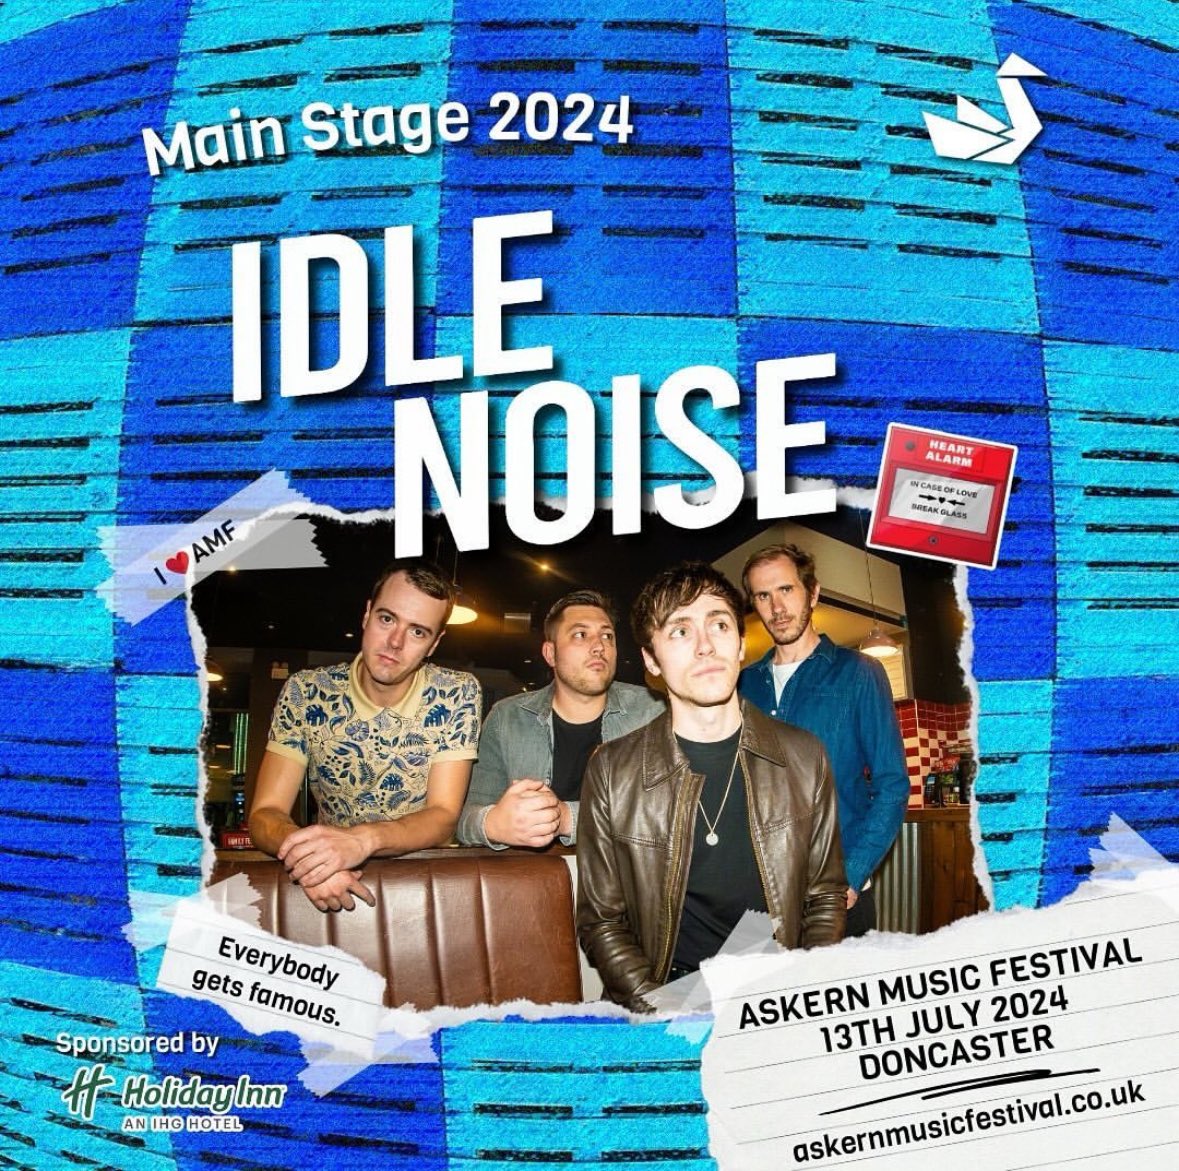 ASKERN FESTIVAL • MAIN STAGE Absolutely honoured to have been invited to join Billy Ocean, Reverend & The Makers and The View on the main stage at this year's @AskernMF! We can't wait to see you there, come and be part of the noise! ⚡️